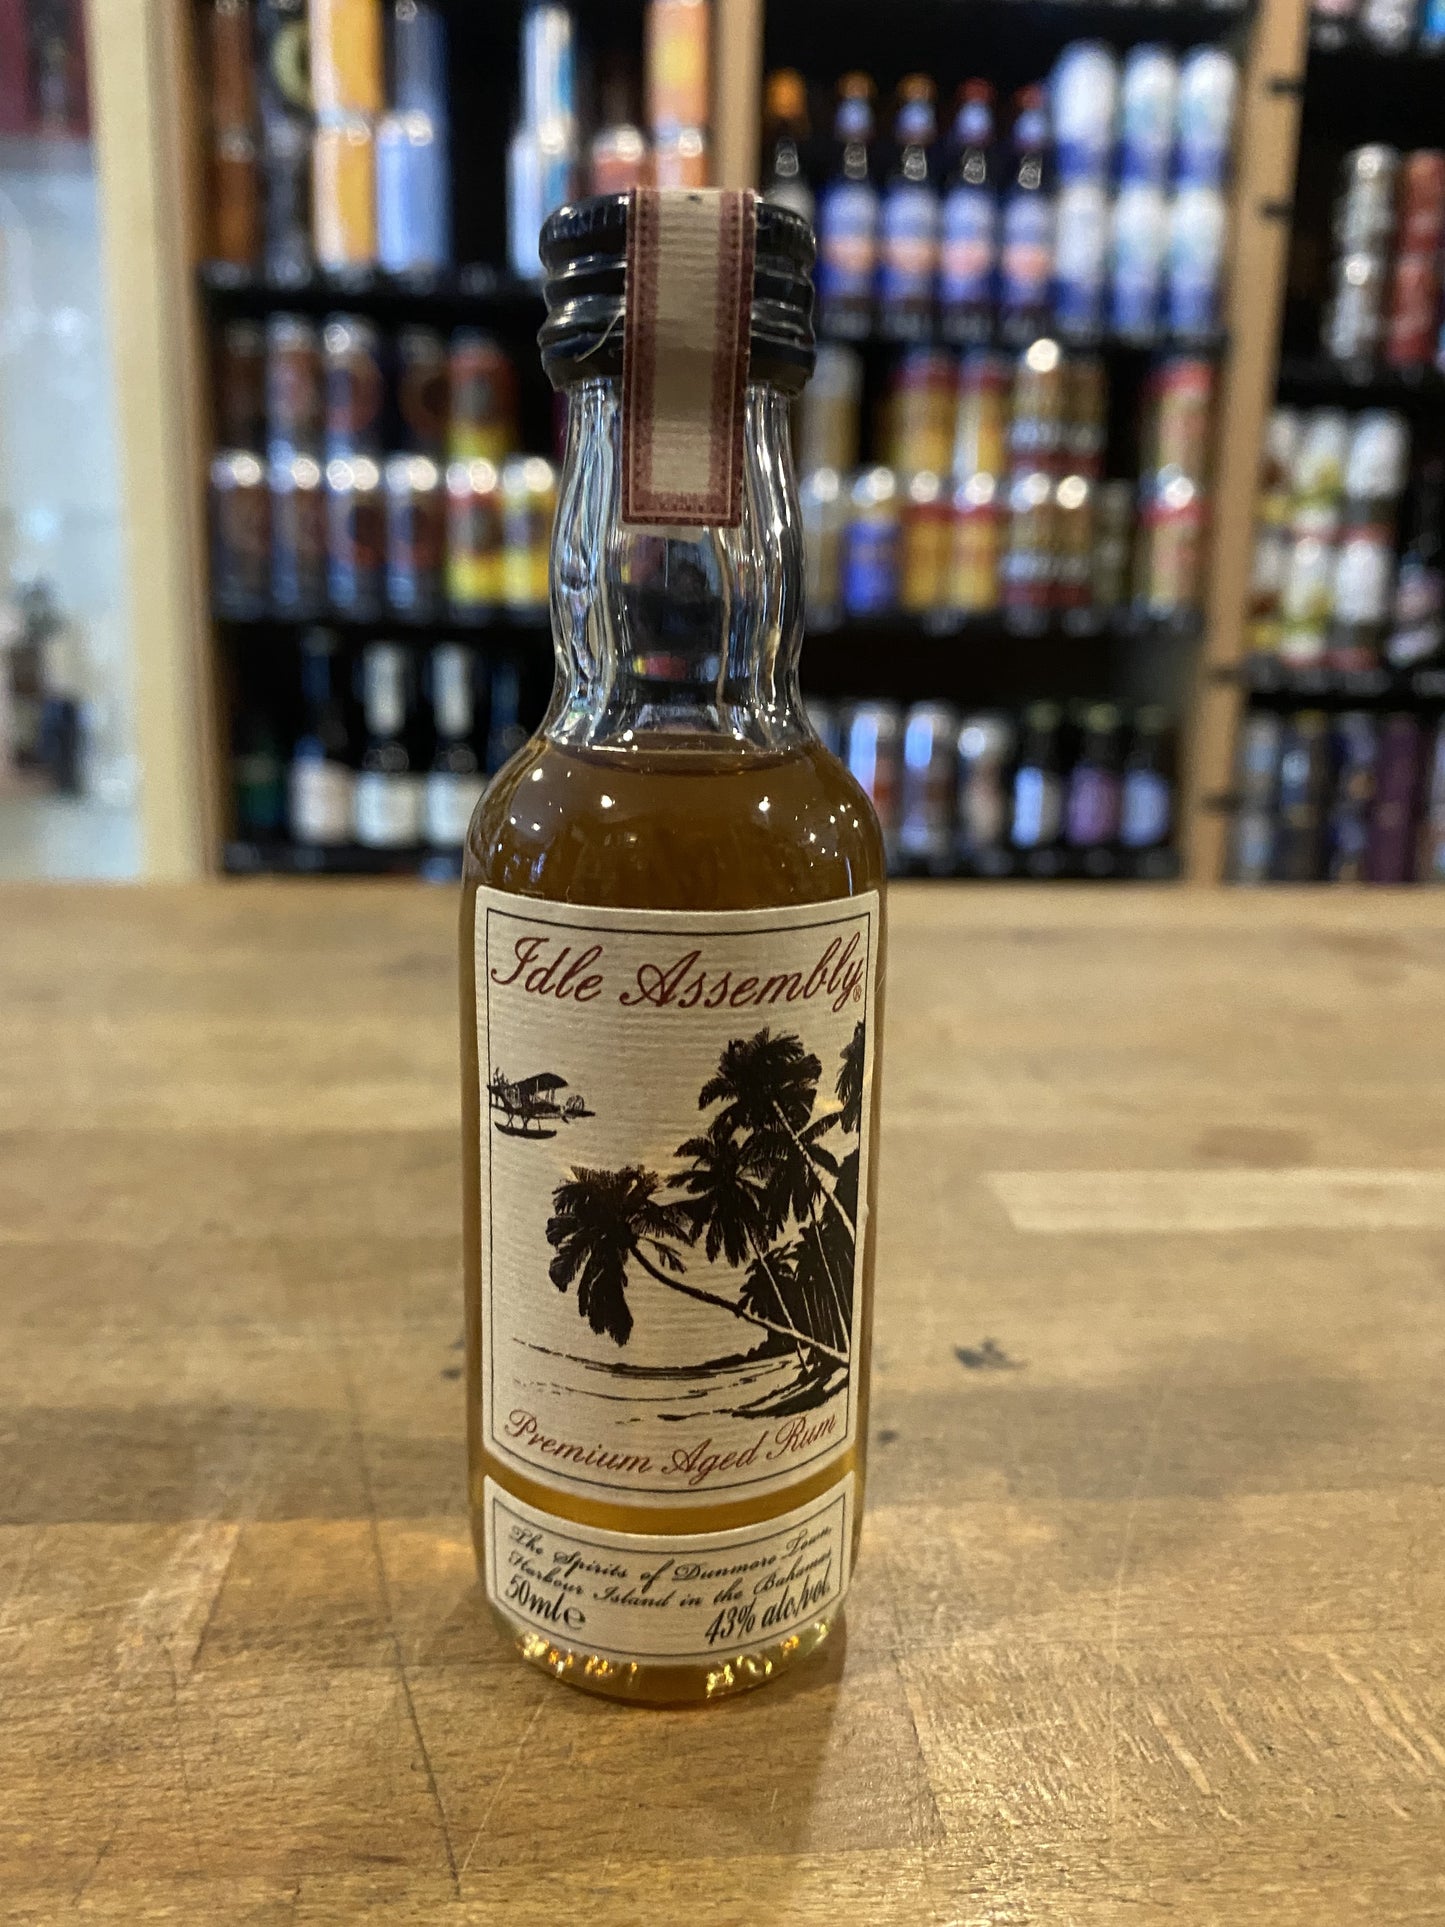 Idle Assembly Rum Miniature 5cl